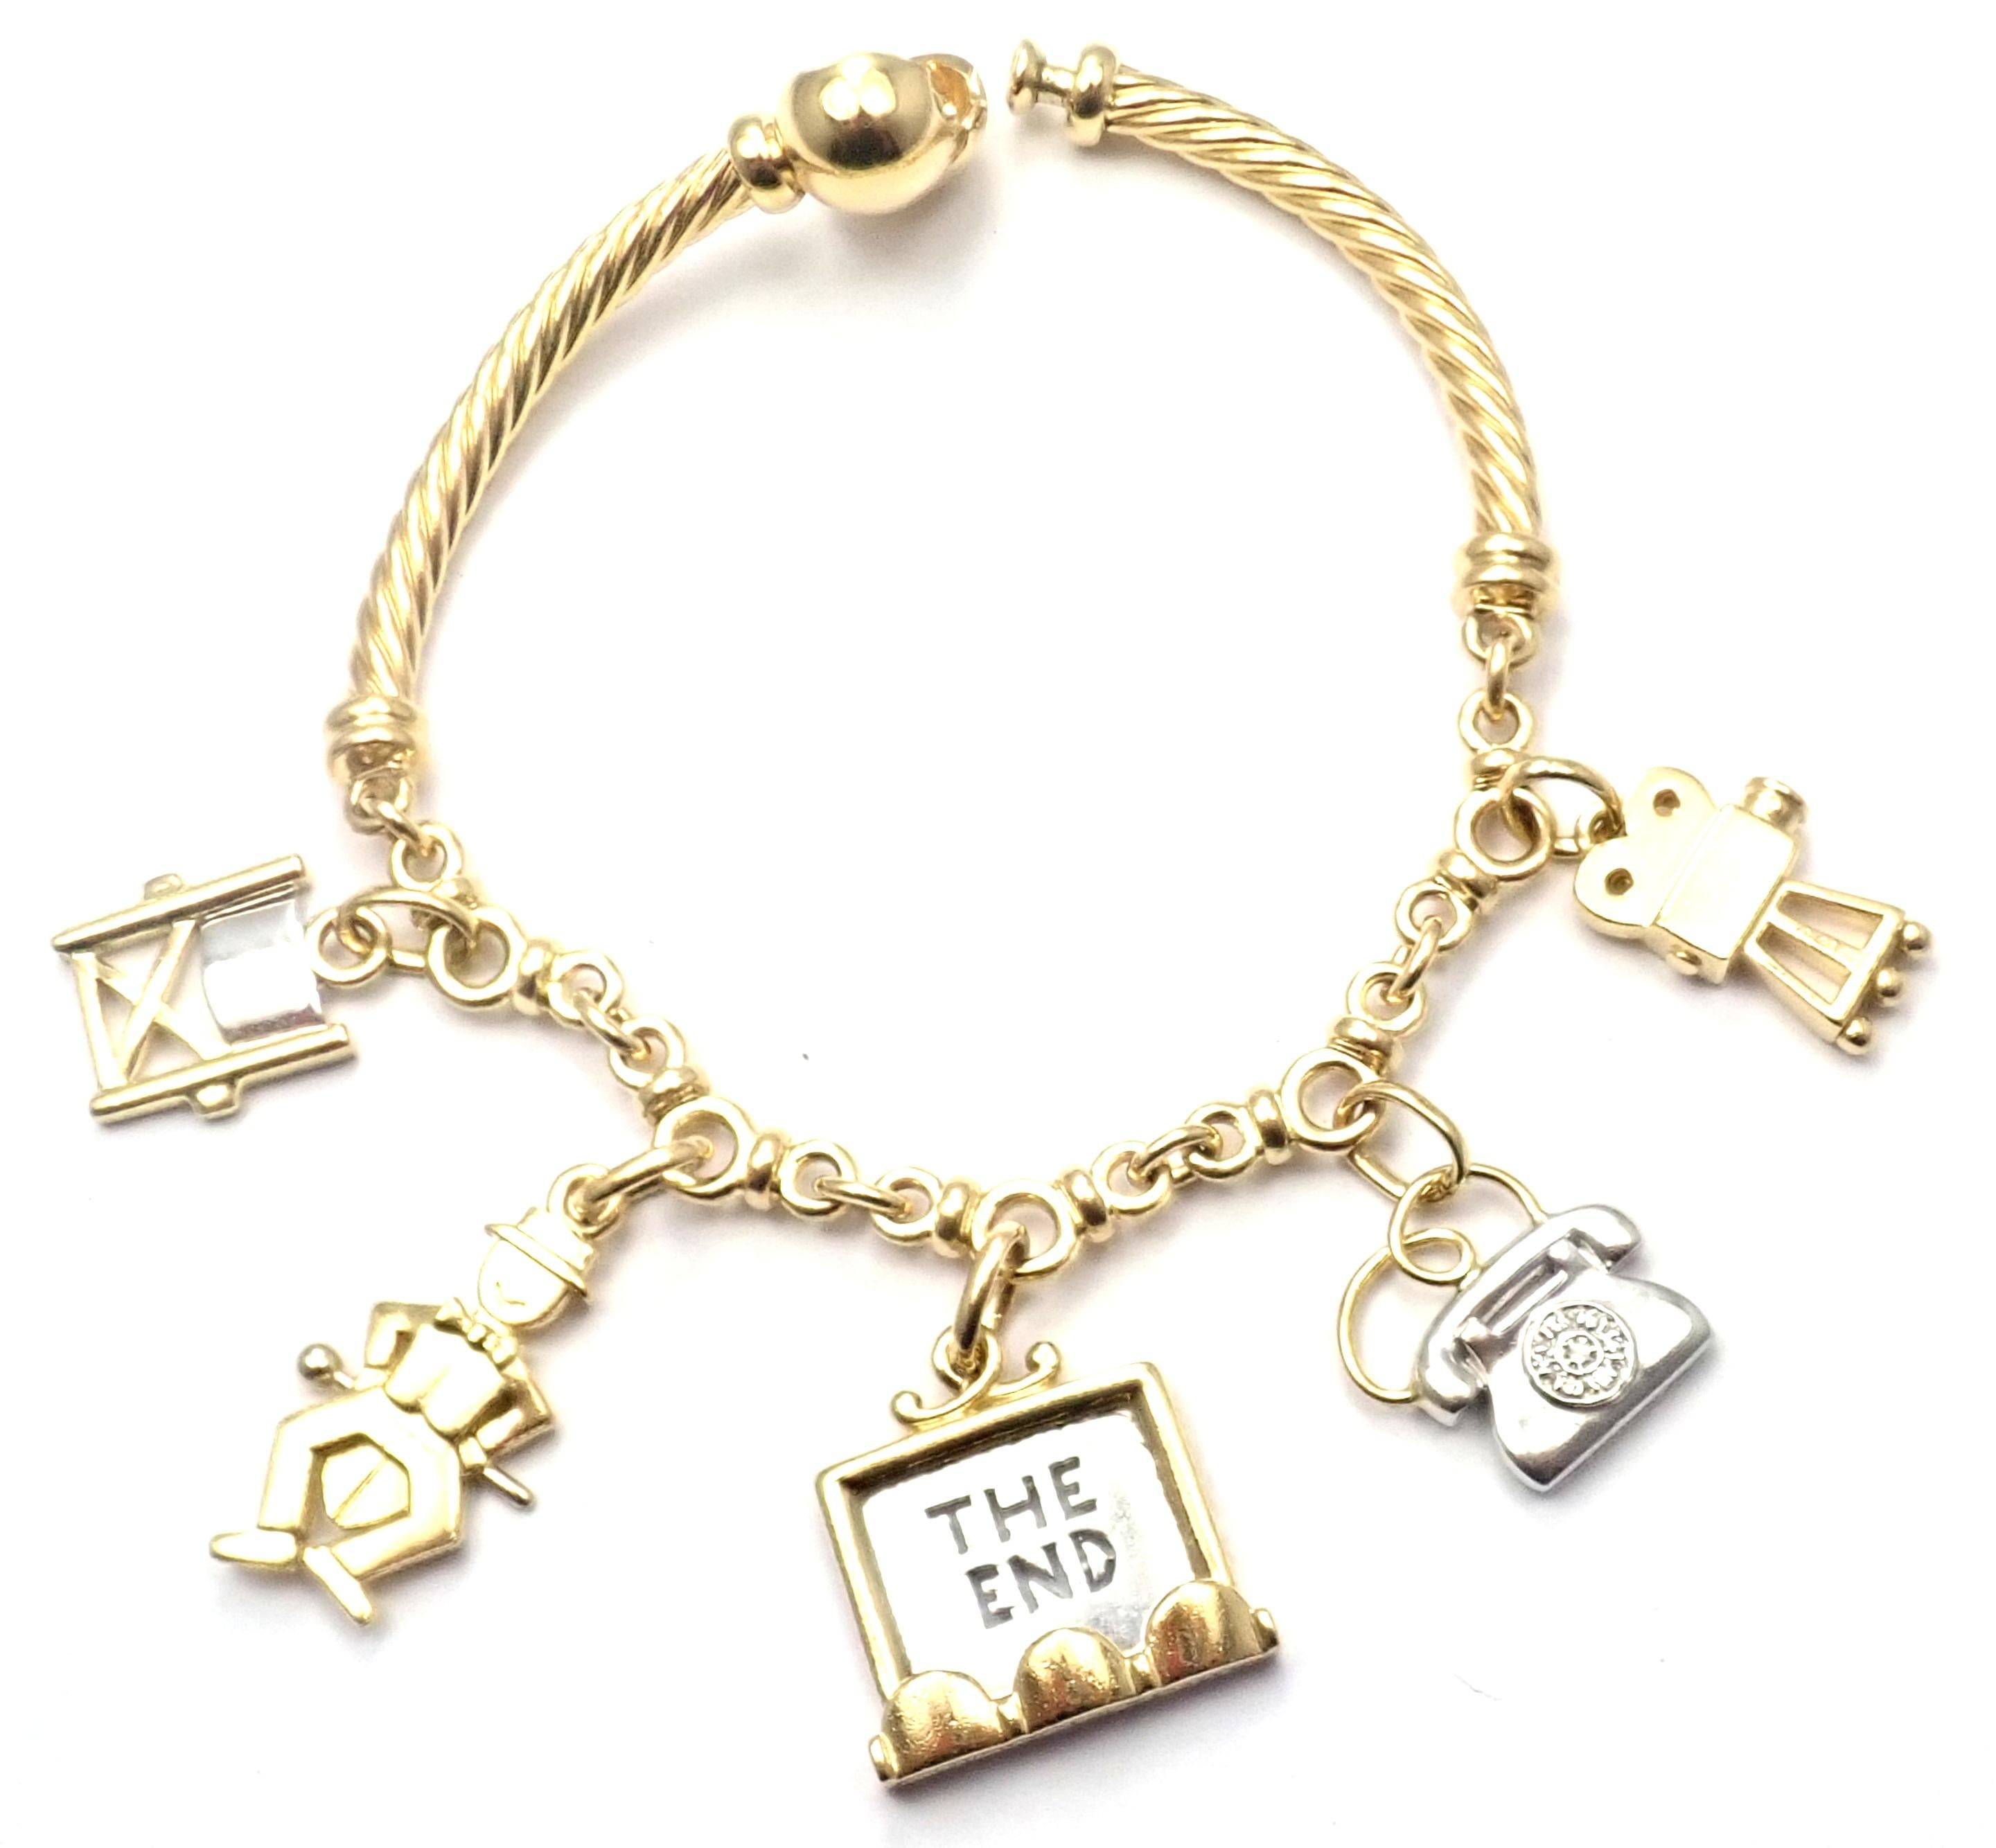 gold bangle bracelet with charms